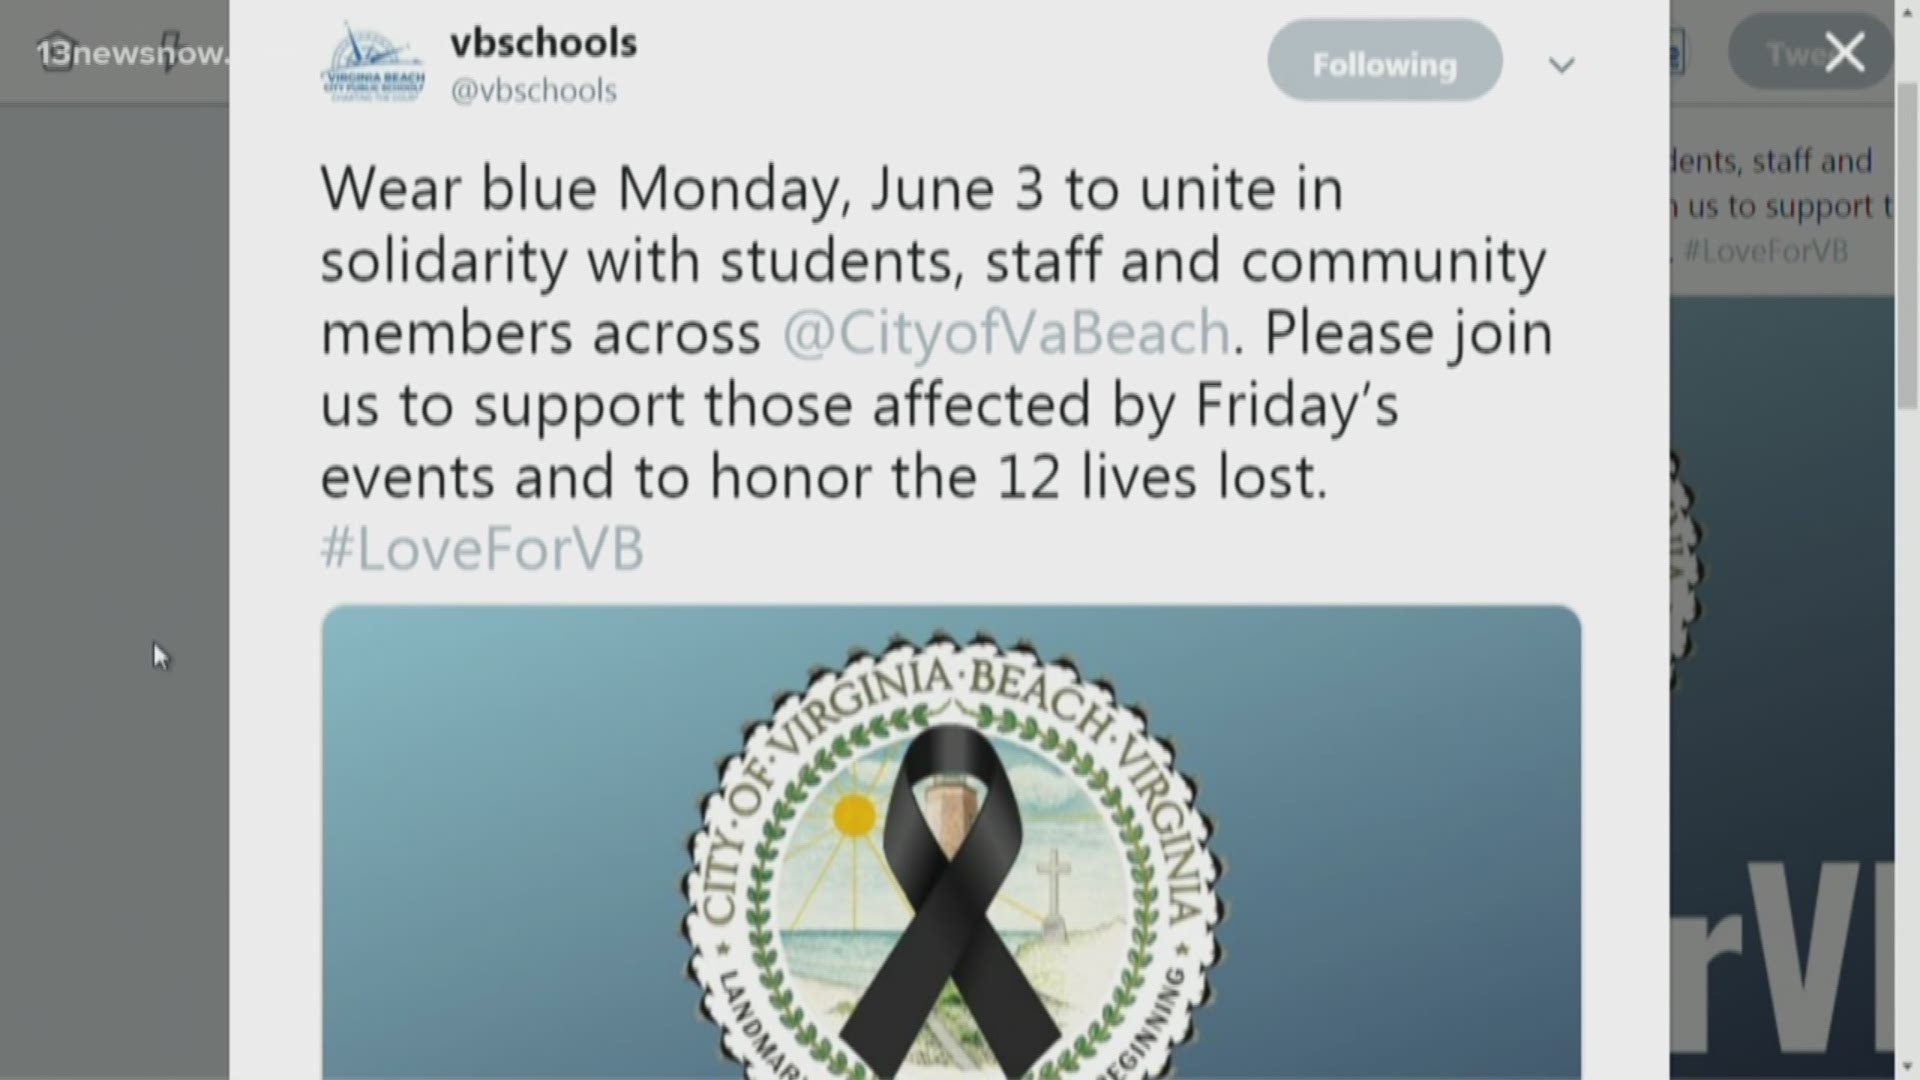 To unite the community, leaders from the Virginia Beach City Schools are asking students, staff and community members to wear blue on Monday.